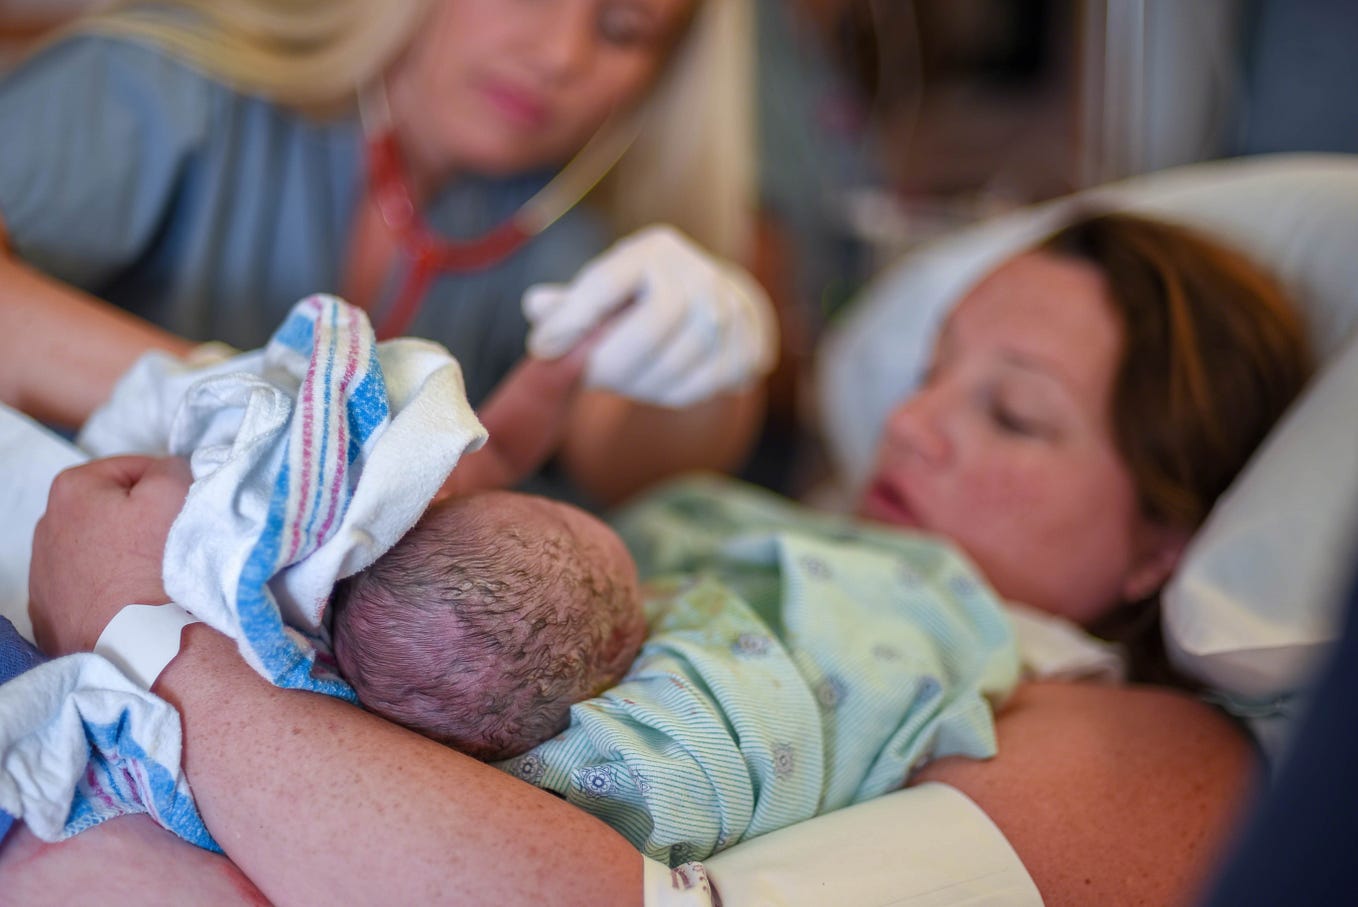 Woman holding newborn baby with midwife by her side.